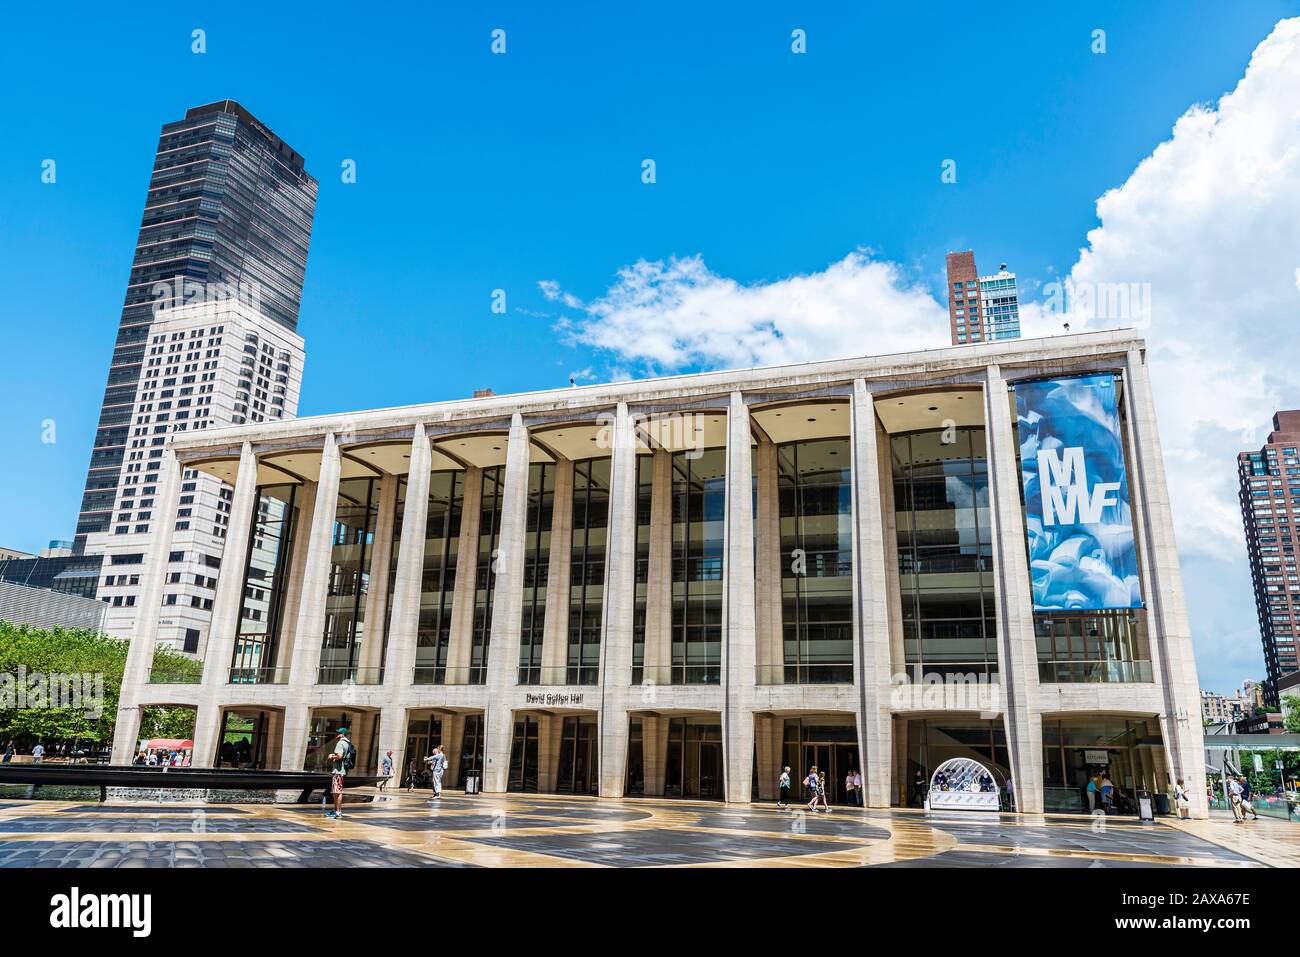 New York City, USA - 3. August 2018: Fassade des David H. Koch Theatre, Theater für Ballett des Lincoln Center for the Performing Arts with People Stockfoto